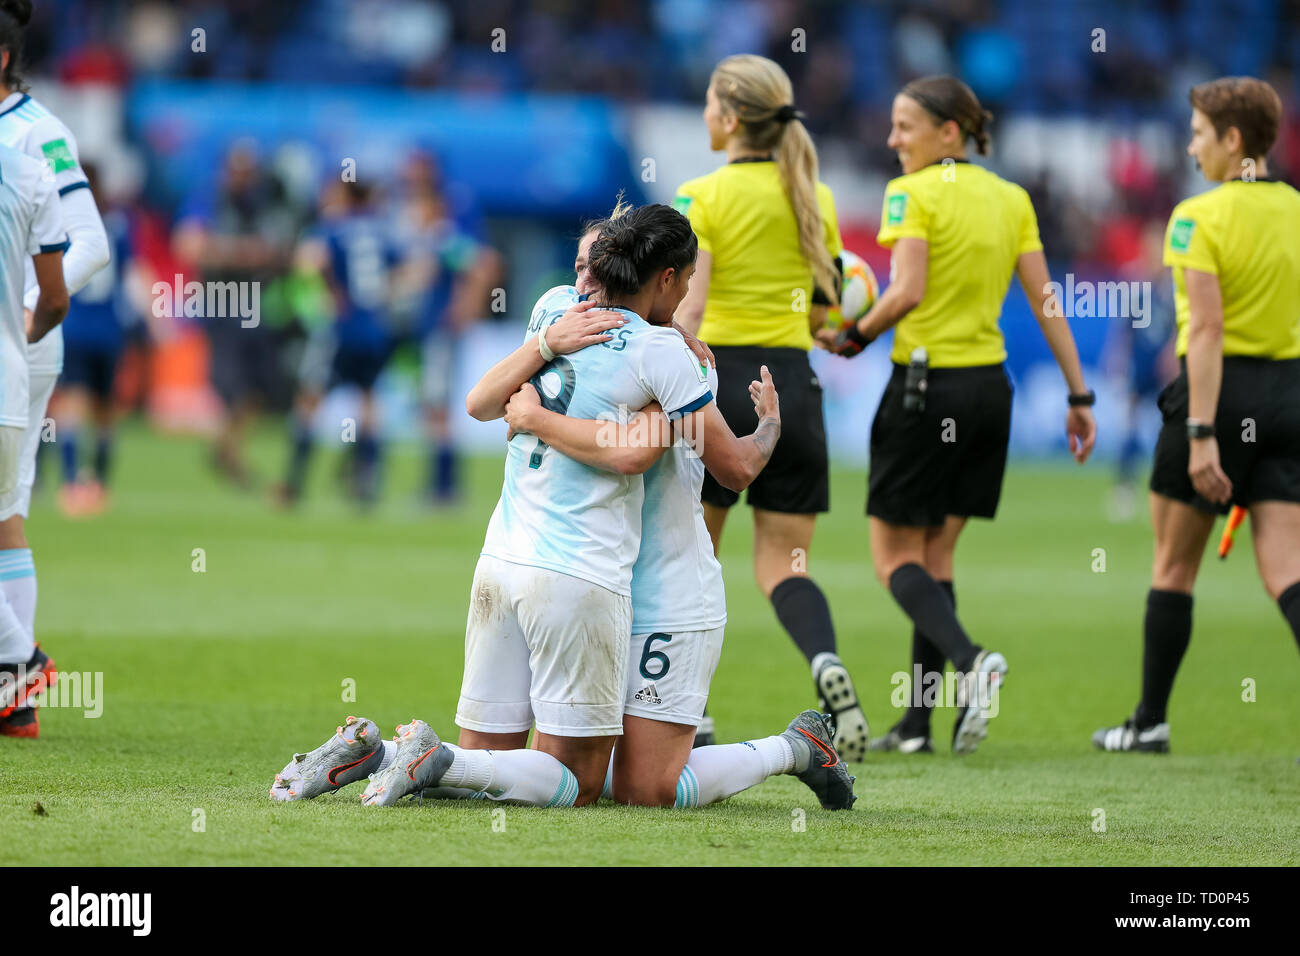 Paris, France. 10th June, 2019. Sole Jaimes and Aldana Cometti of Argentina celebrate their draw at the final whistle during the FIFA Women's World Cup France 2019 Group D match between Argentina and Japan at Parc des Princes in Paris, France on June 10, 2019. Credit: AFLO/Alamy Live News Stock Photo